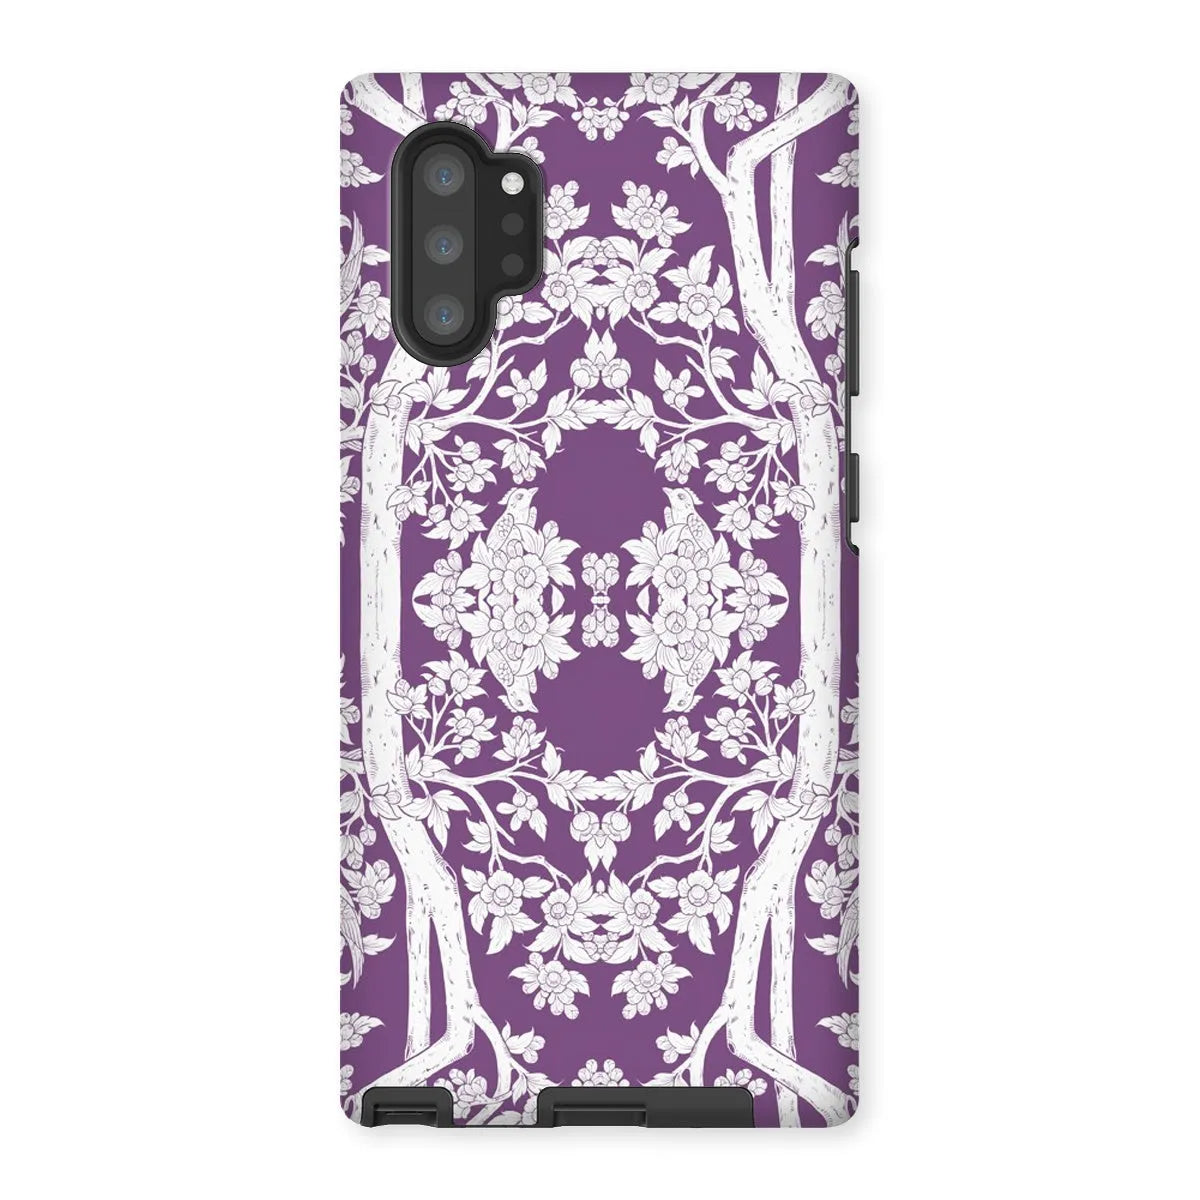 Aviary Purple Aesthetic Pattern Art Phone Case - Samsung Galaxy Note 10p / Matte - Mobile Phone Cases - Aesthetic Art